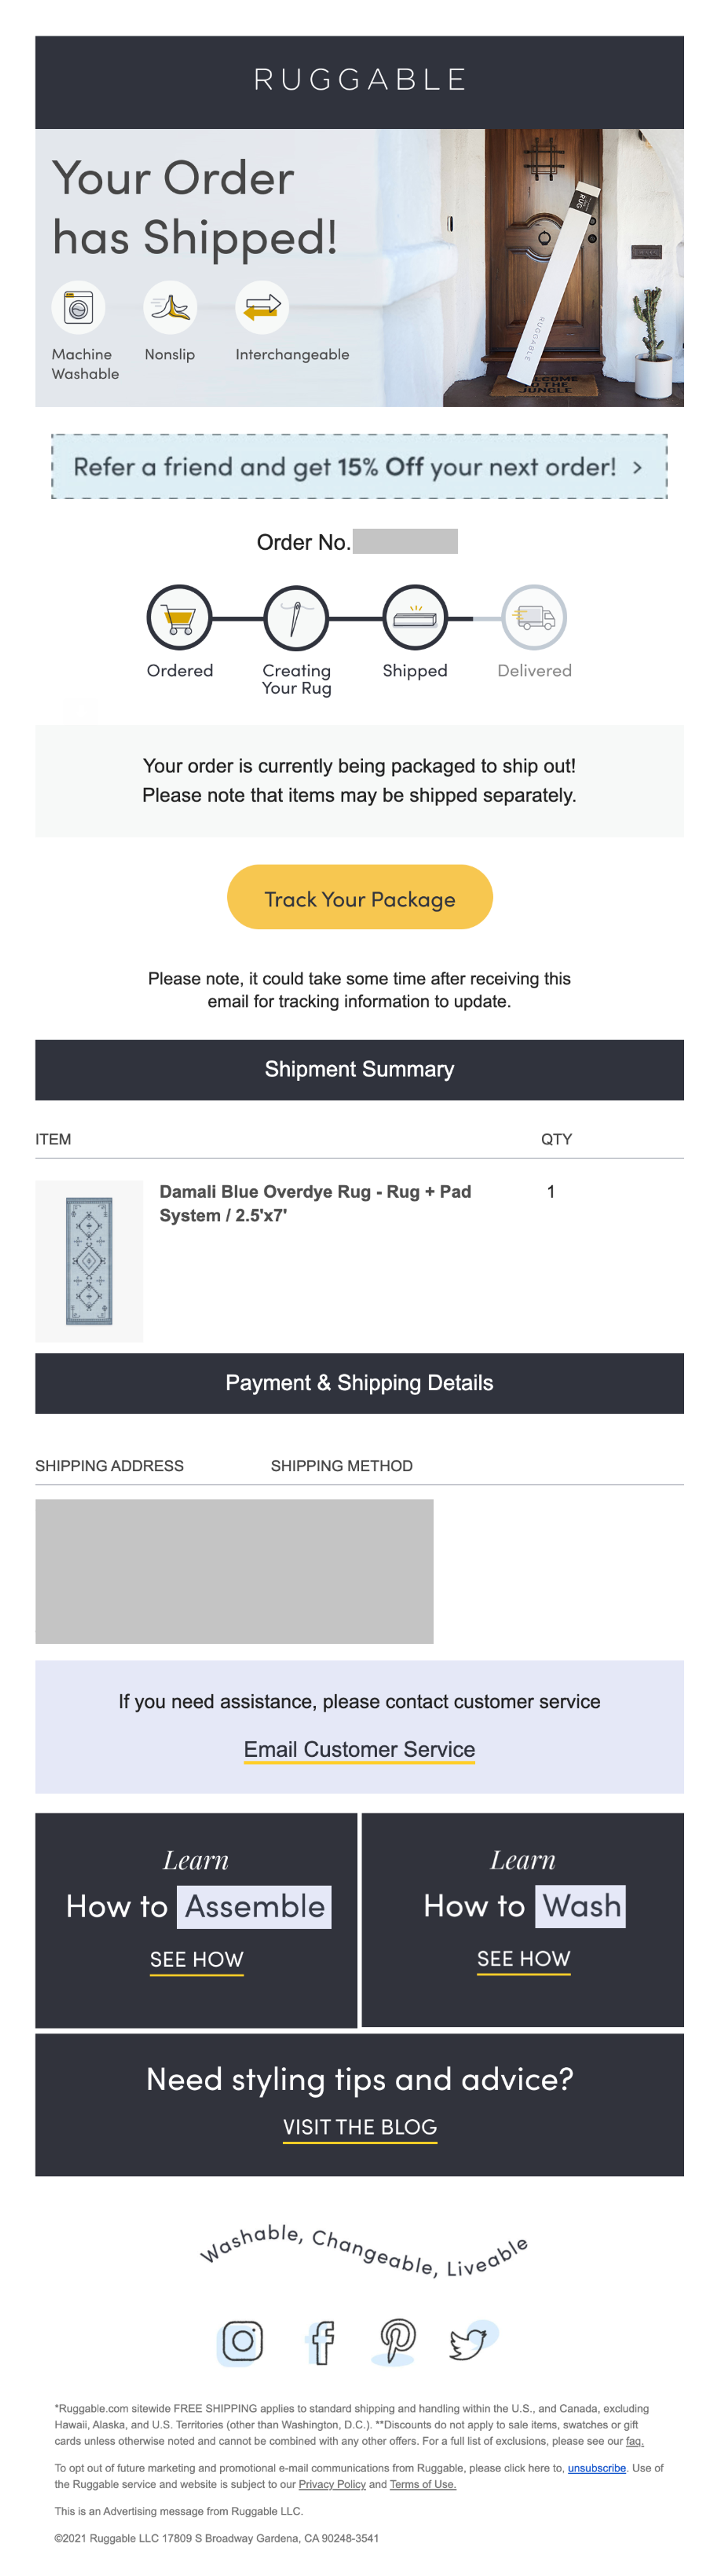 Ruggable Shipment Confirmation Apparel and Accessories Email Template 